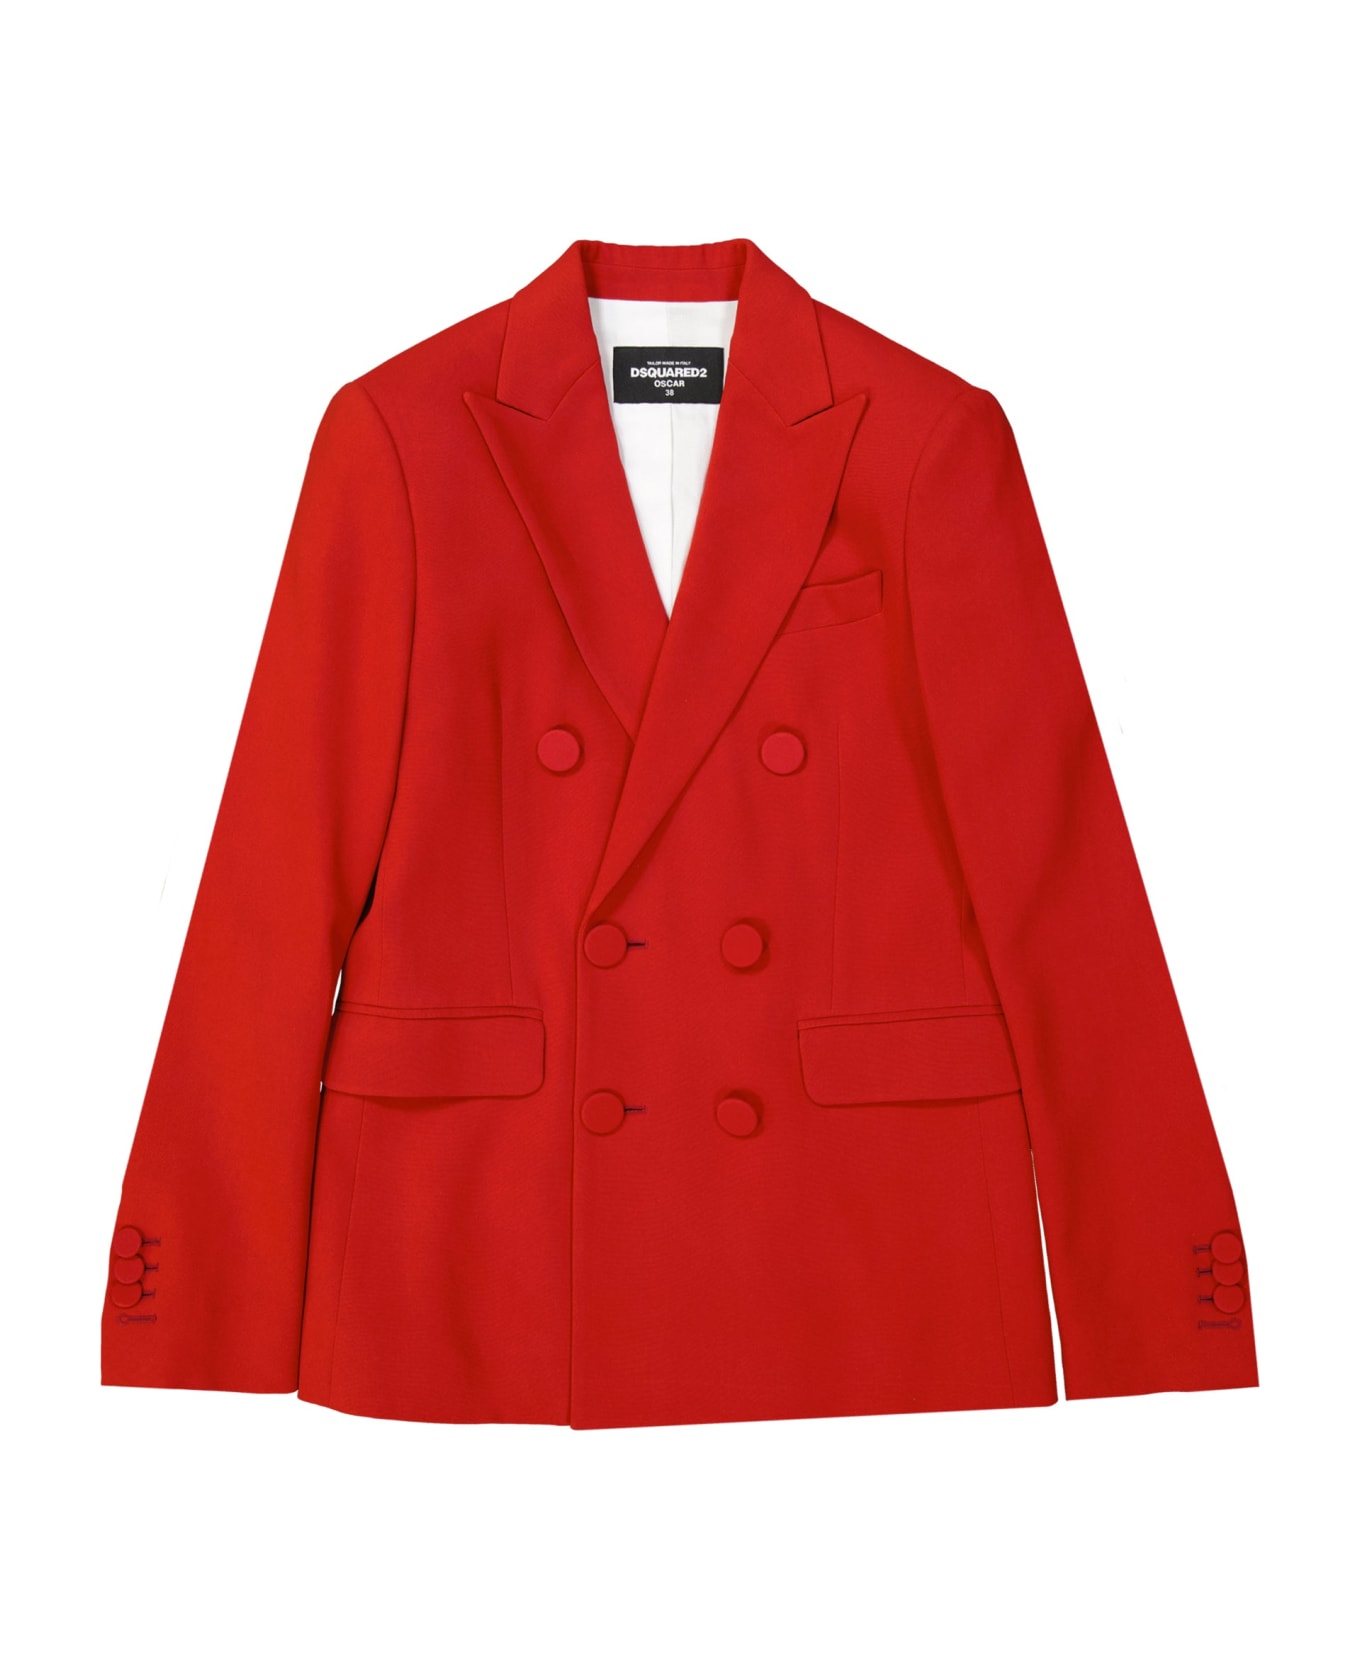 Dsquared2 Double-breasted Jacket - Red ブレザー